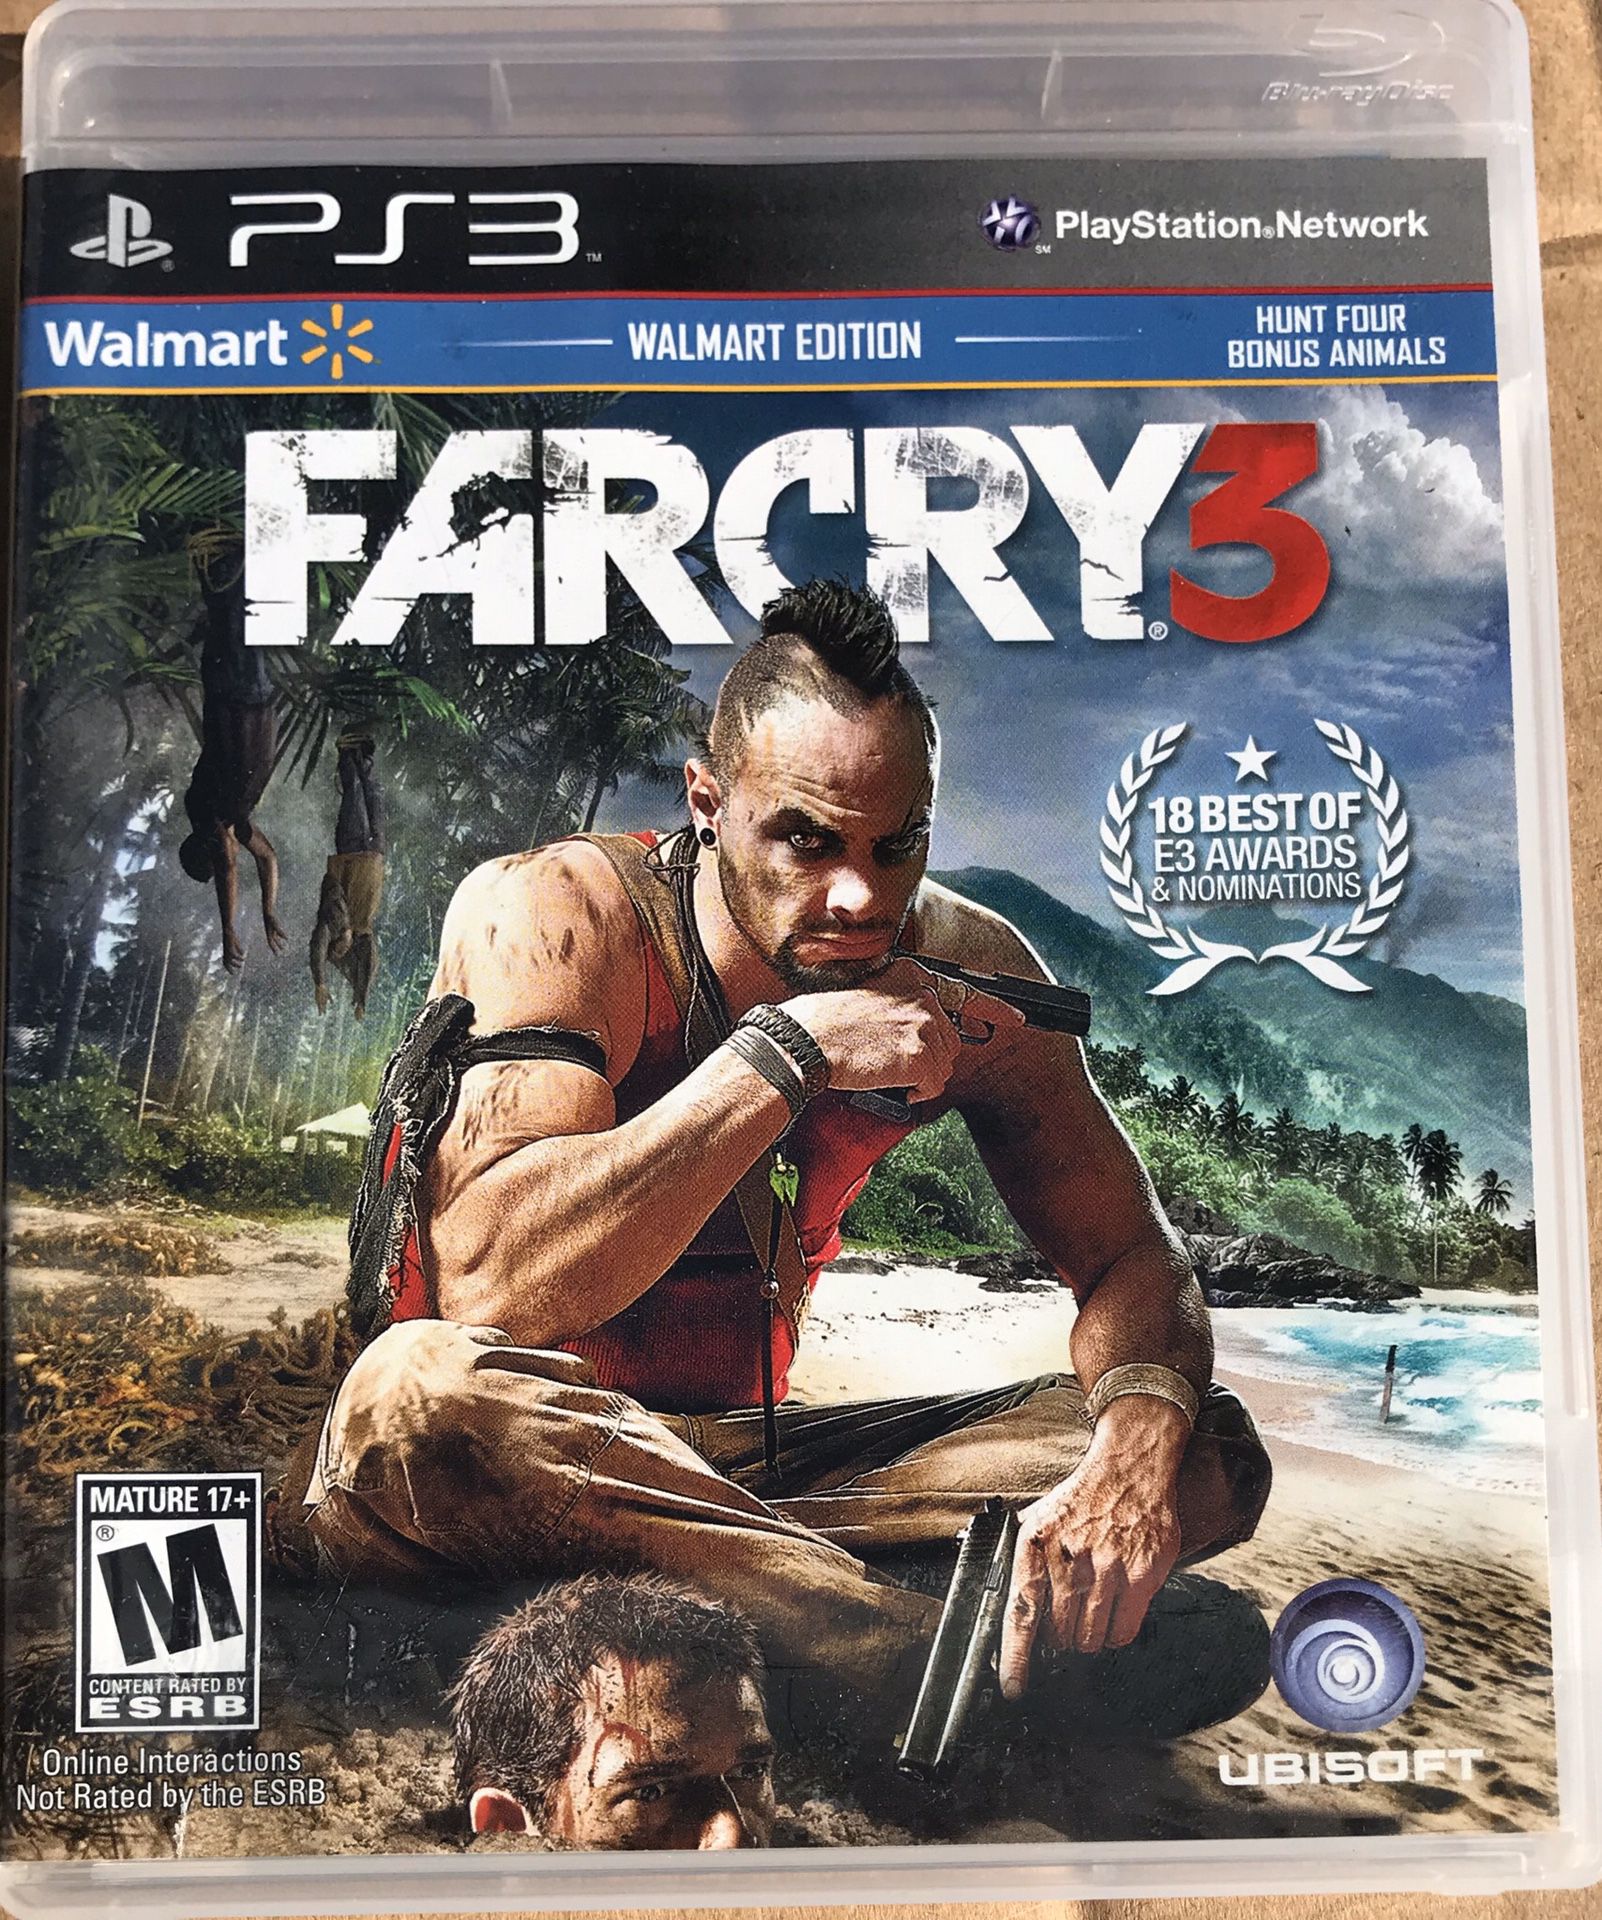 PS3 farcry 3, perfect condition